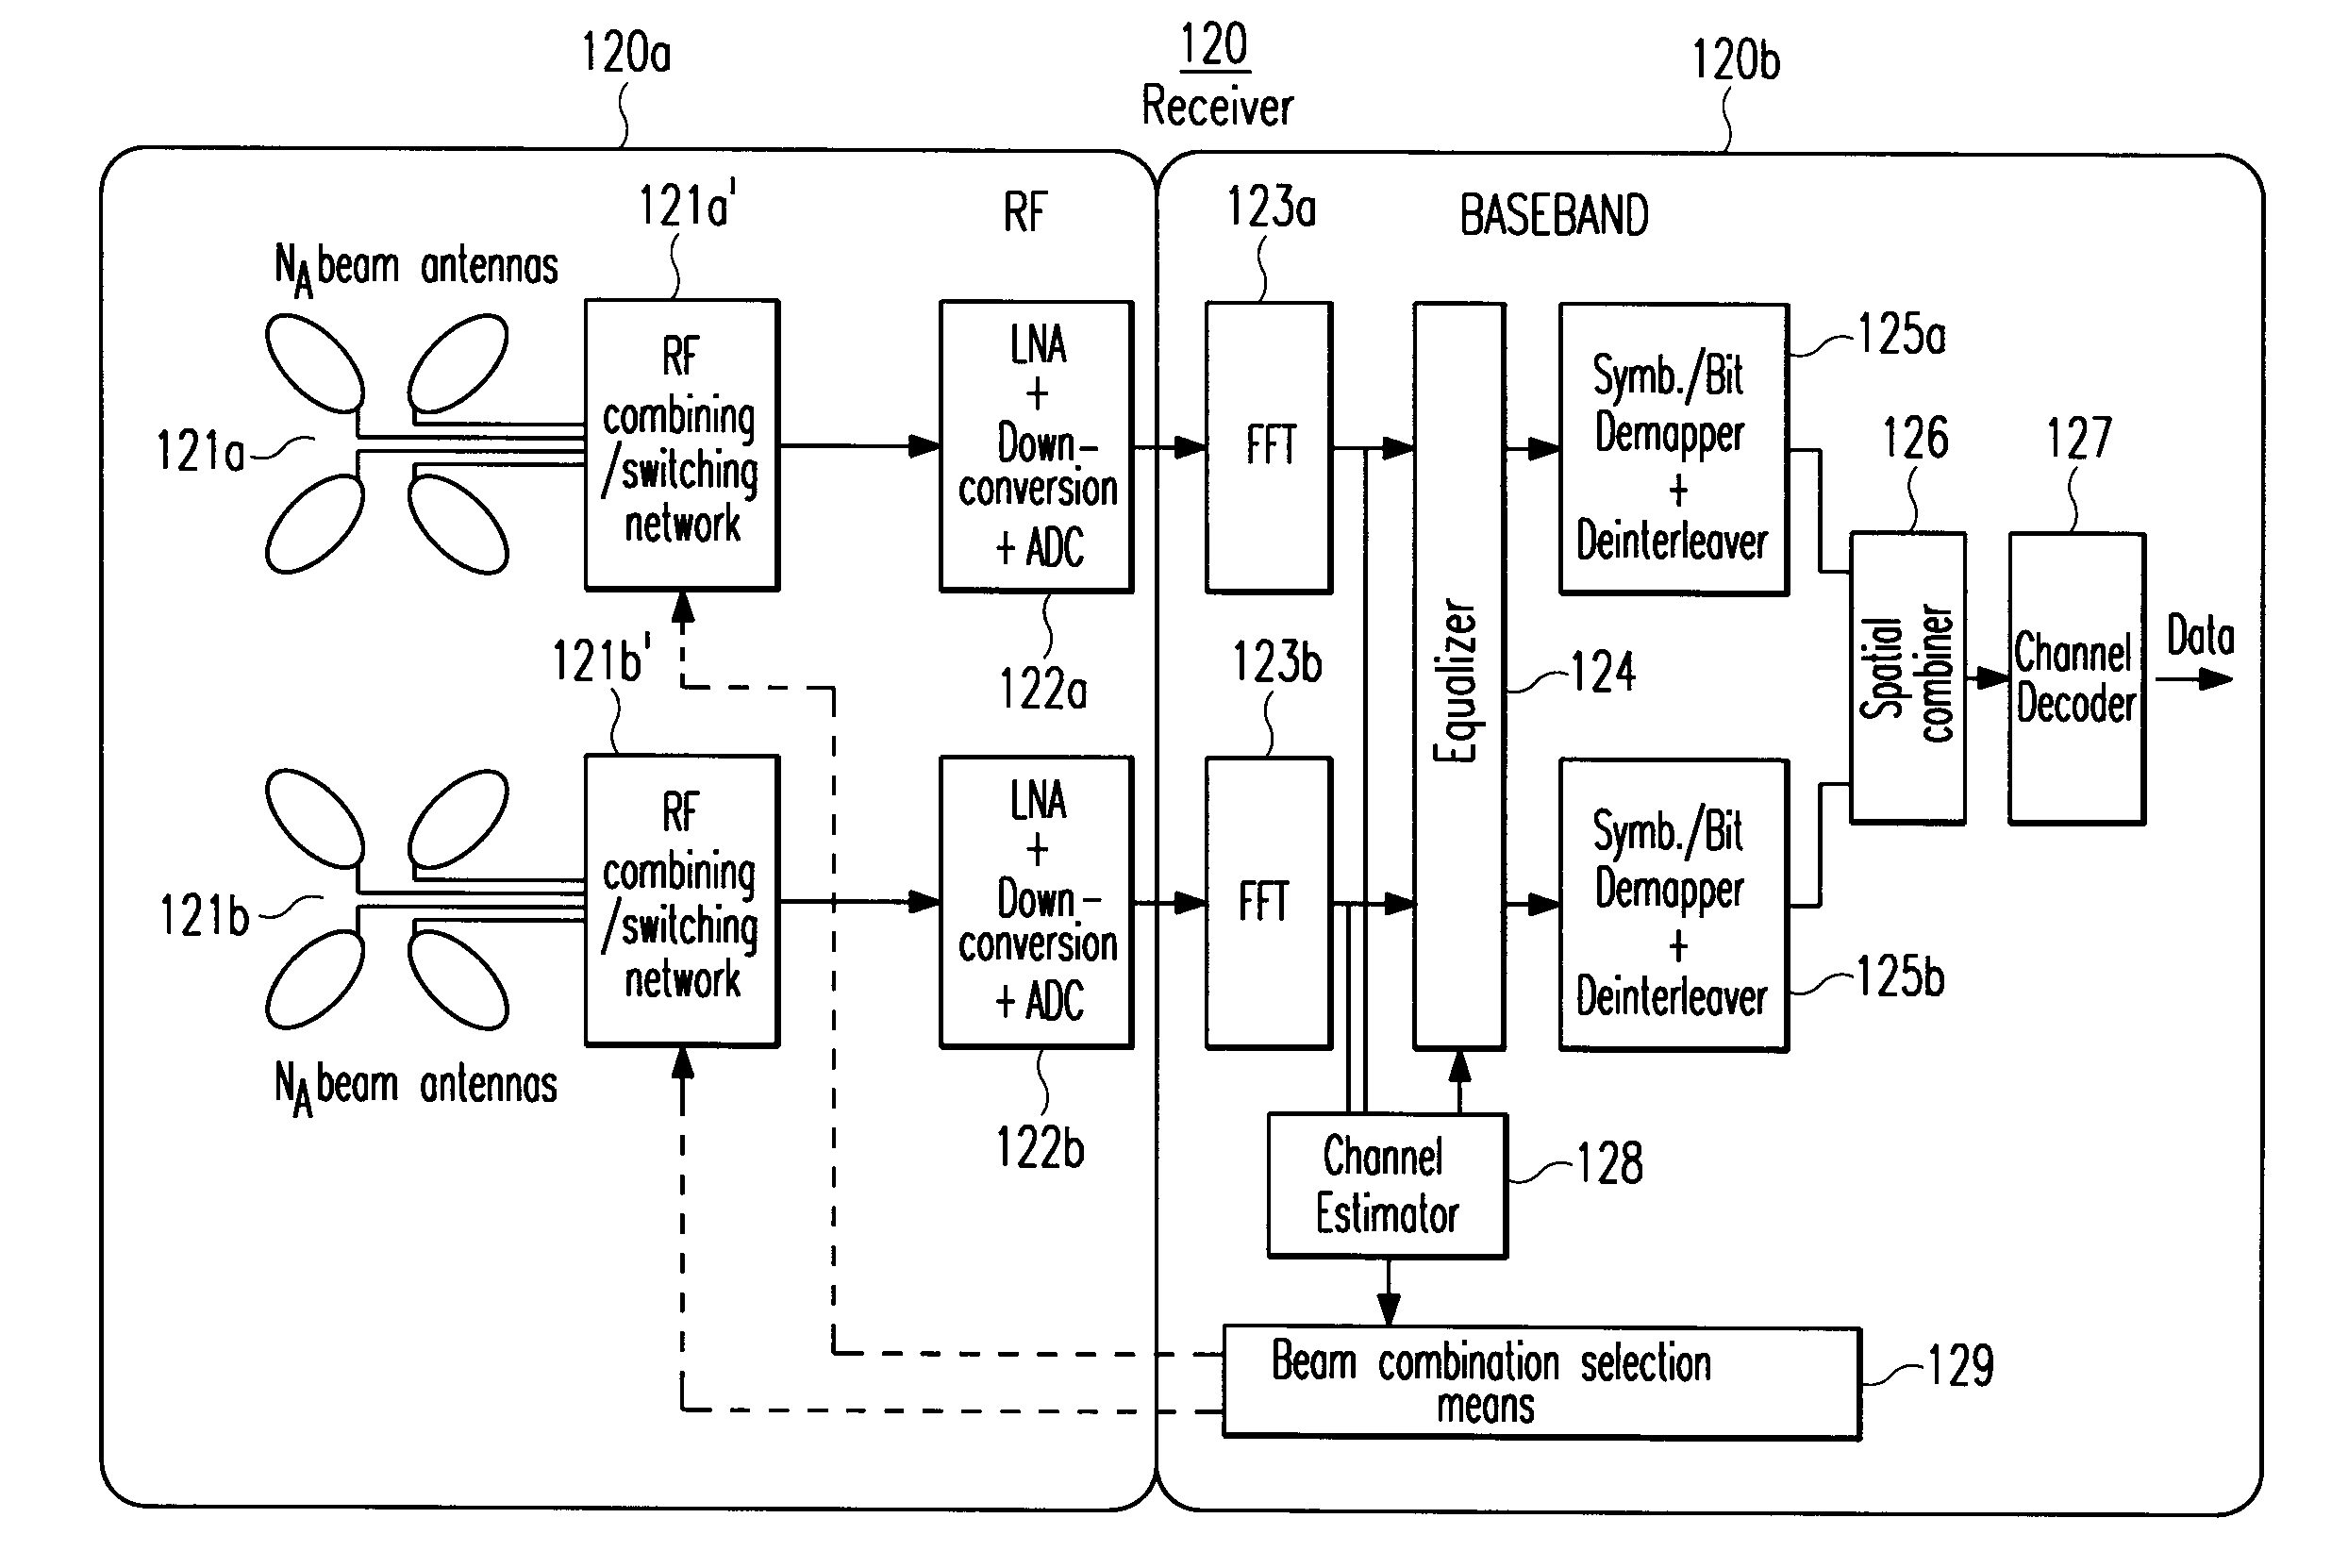 Multiple-input multiple-output spatial multiplexing system with dynamic antenna beam combination selection capability